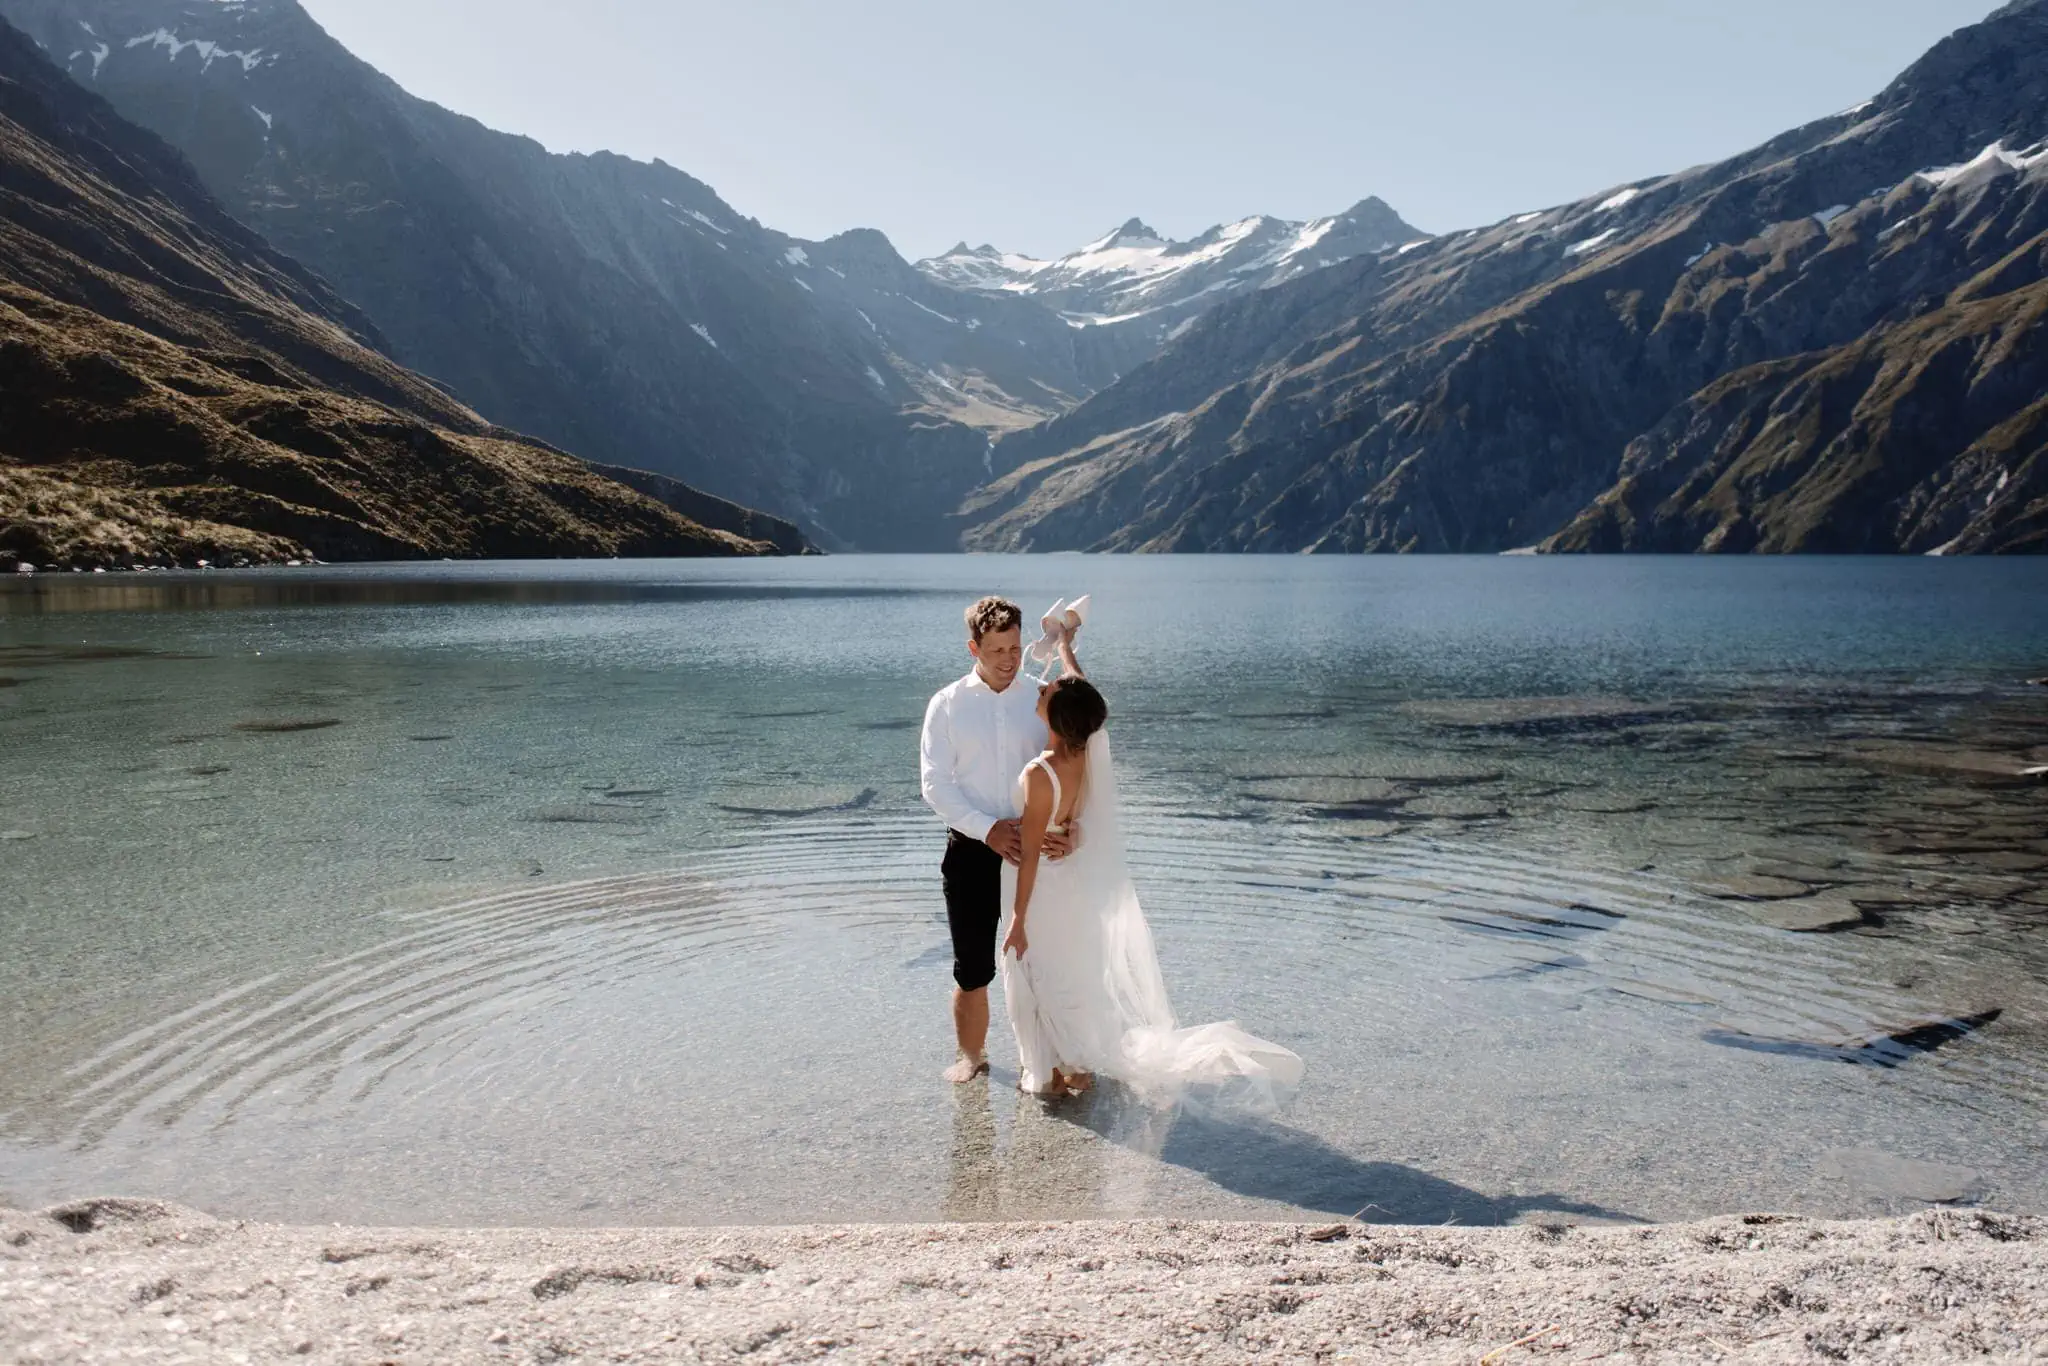 Queenstown New Zealand Elopement Wedding Photographer - A bride and groom standing in the shallow water of Lake Lochnagar in New Zealand.